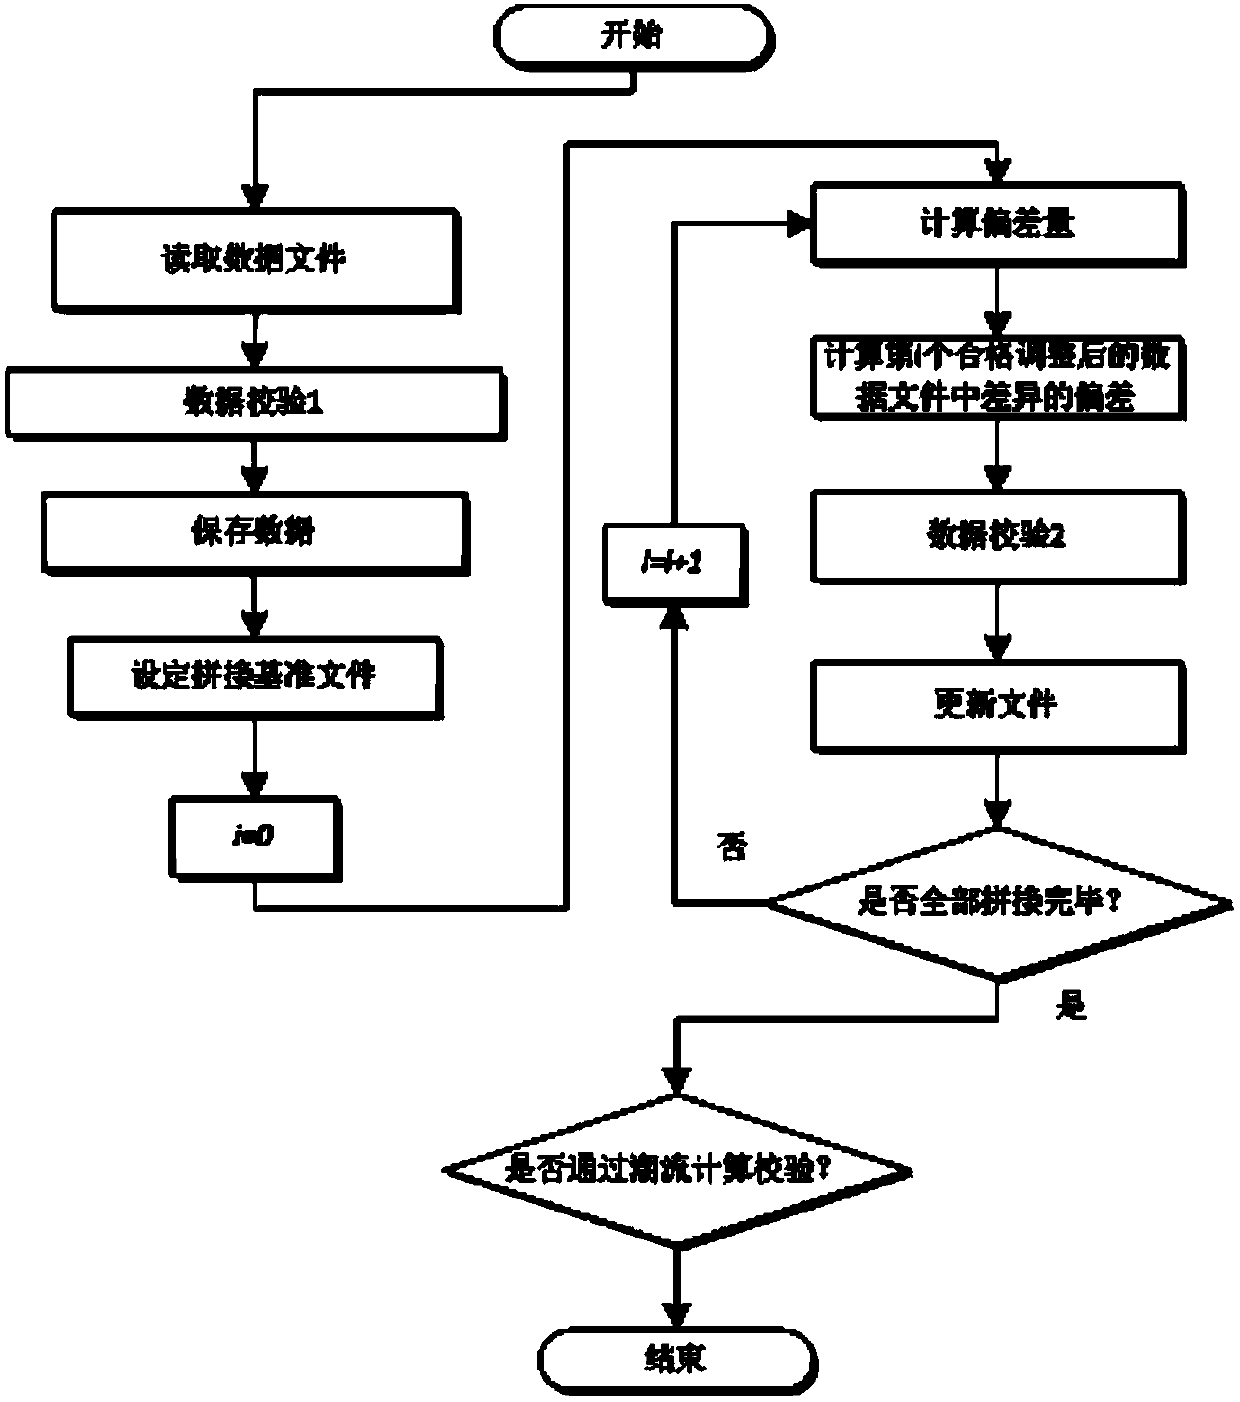 Automatic splicing method of power grid planning model data files